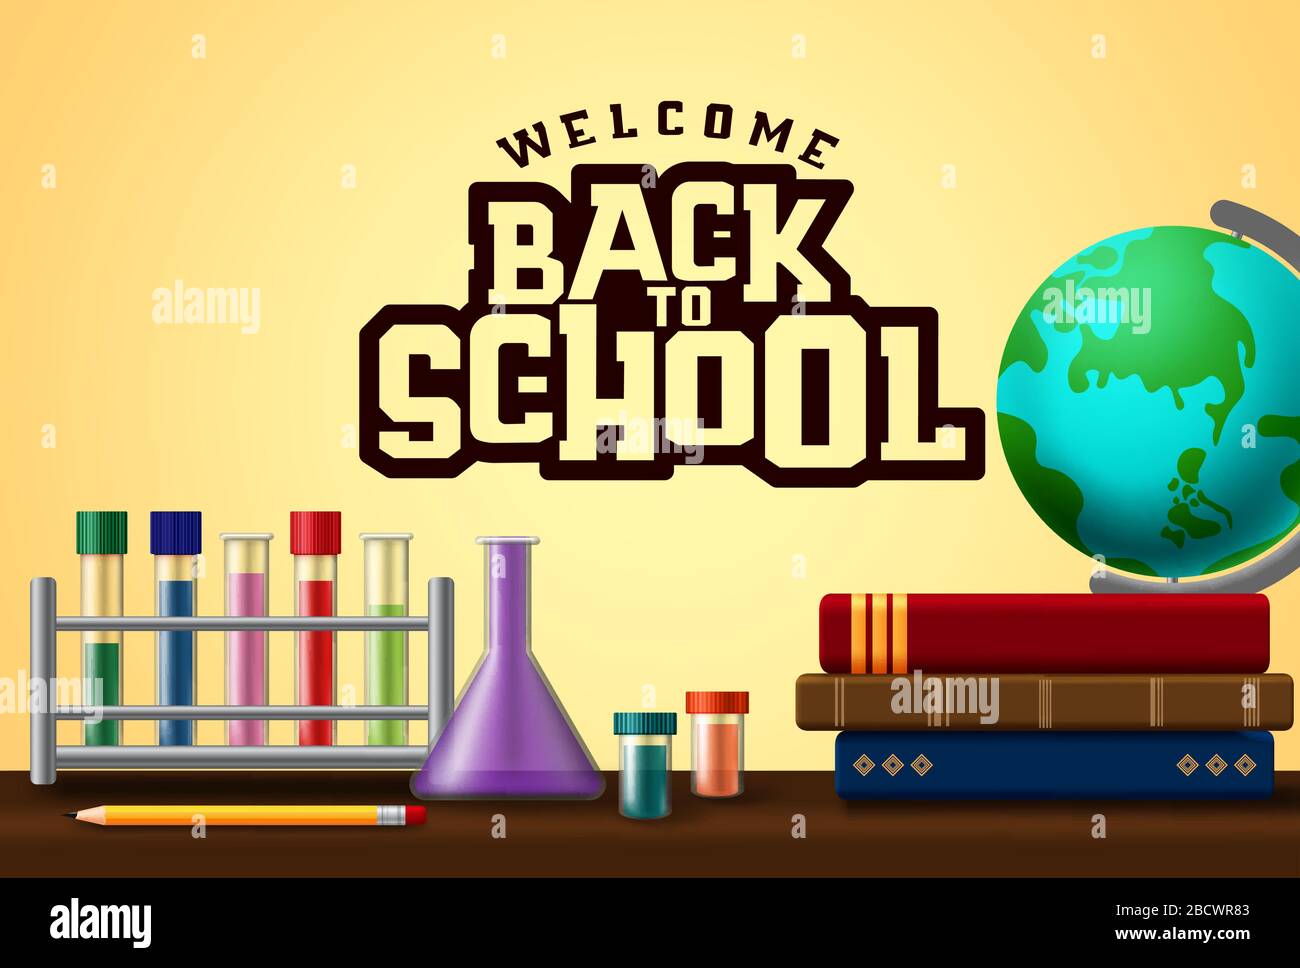 Welcome back to school vector banner design. Welcome back to school text in yellow background with laboratory elements and school supplies like books, Stock Vector